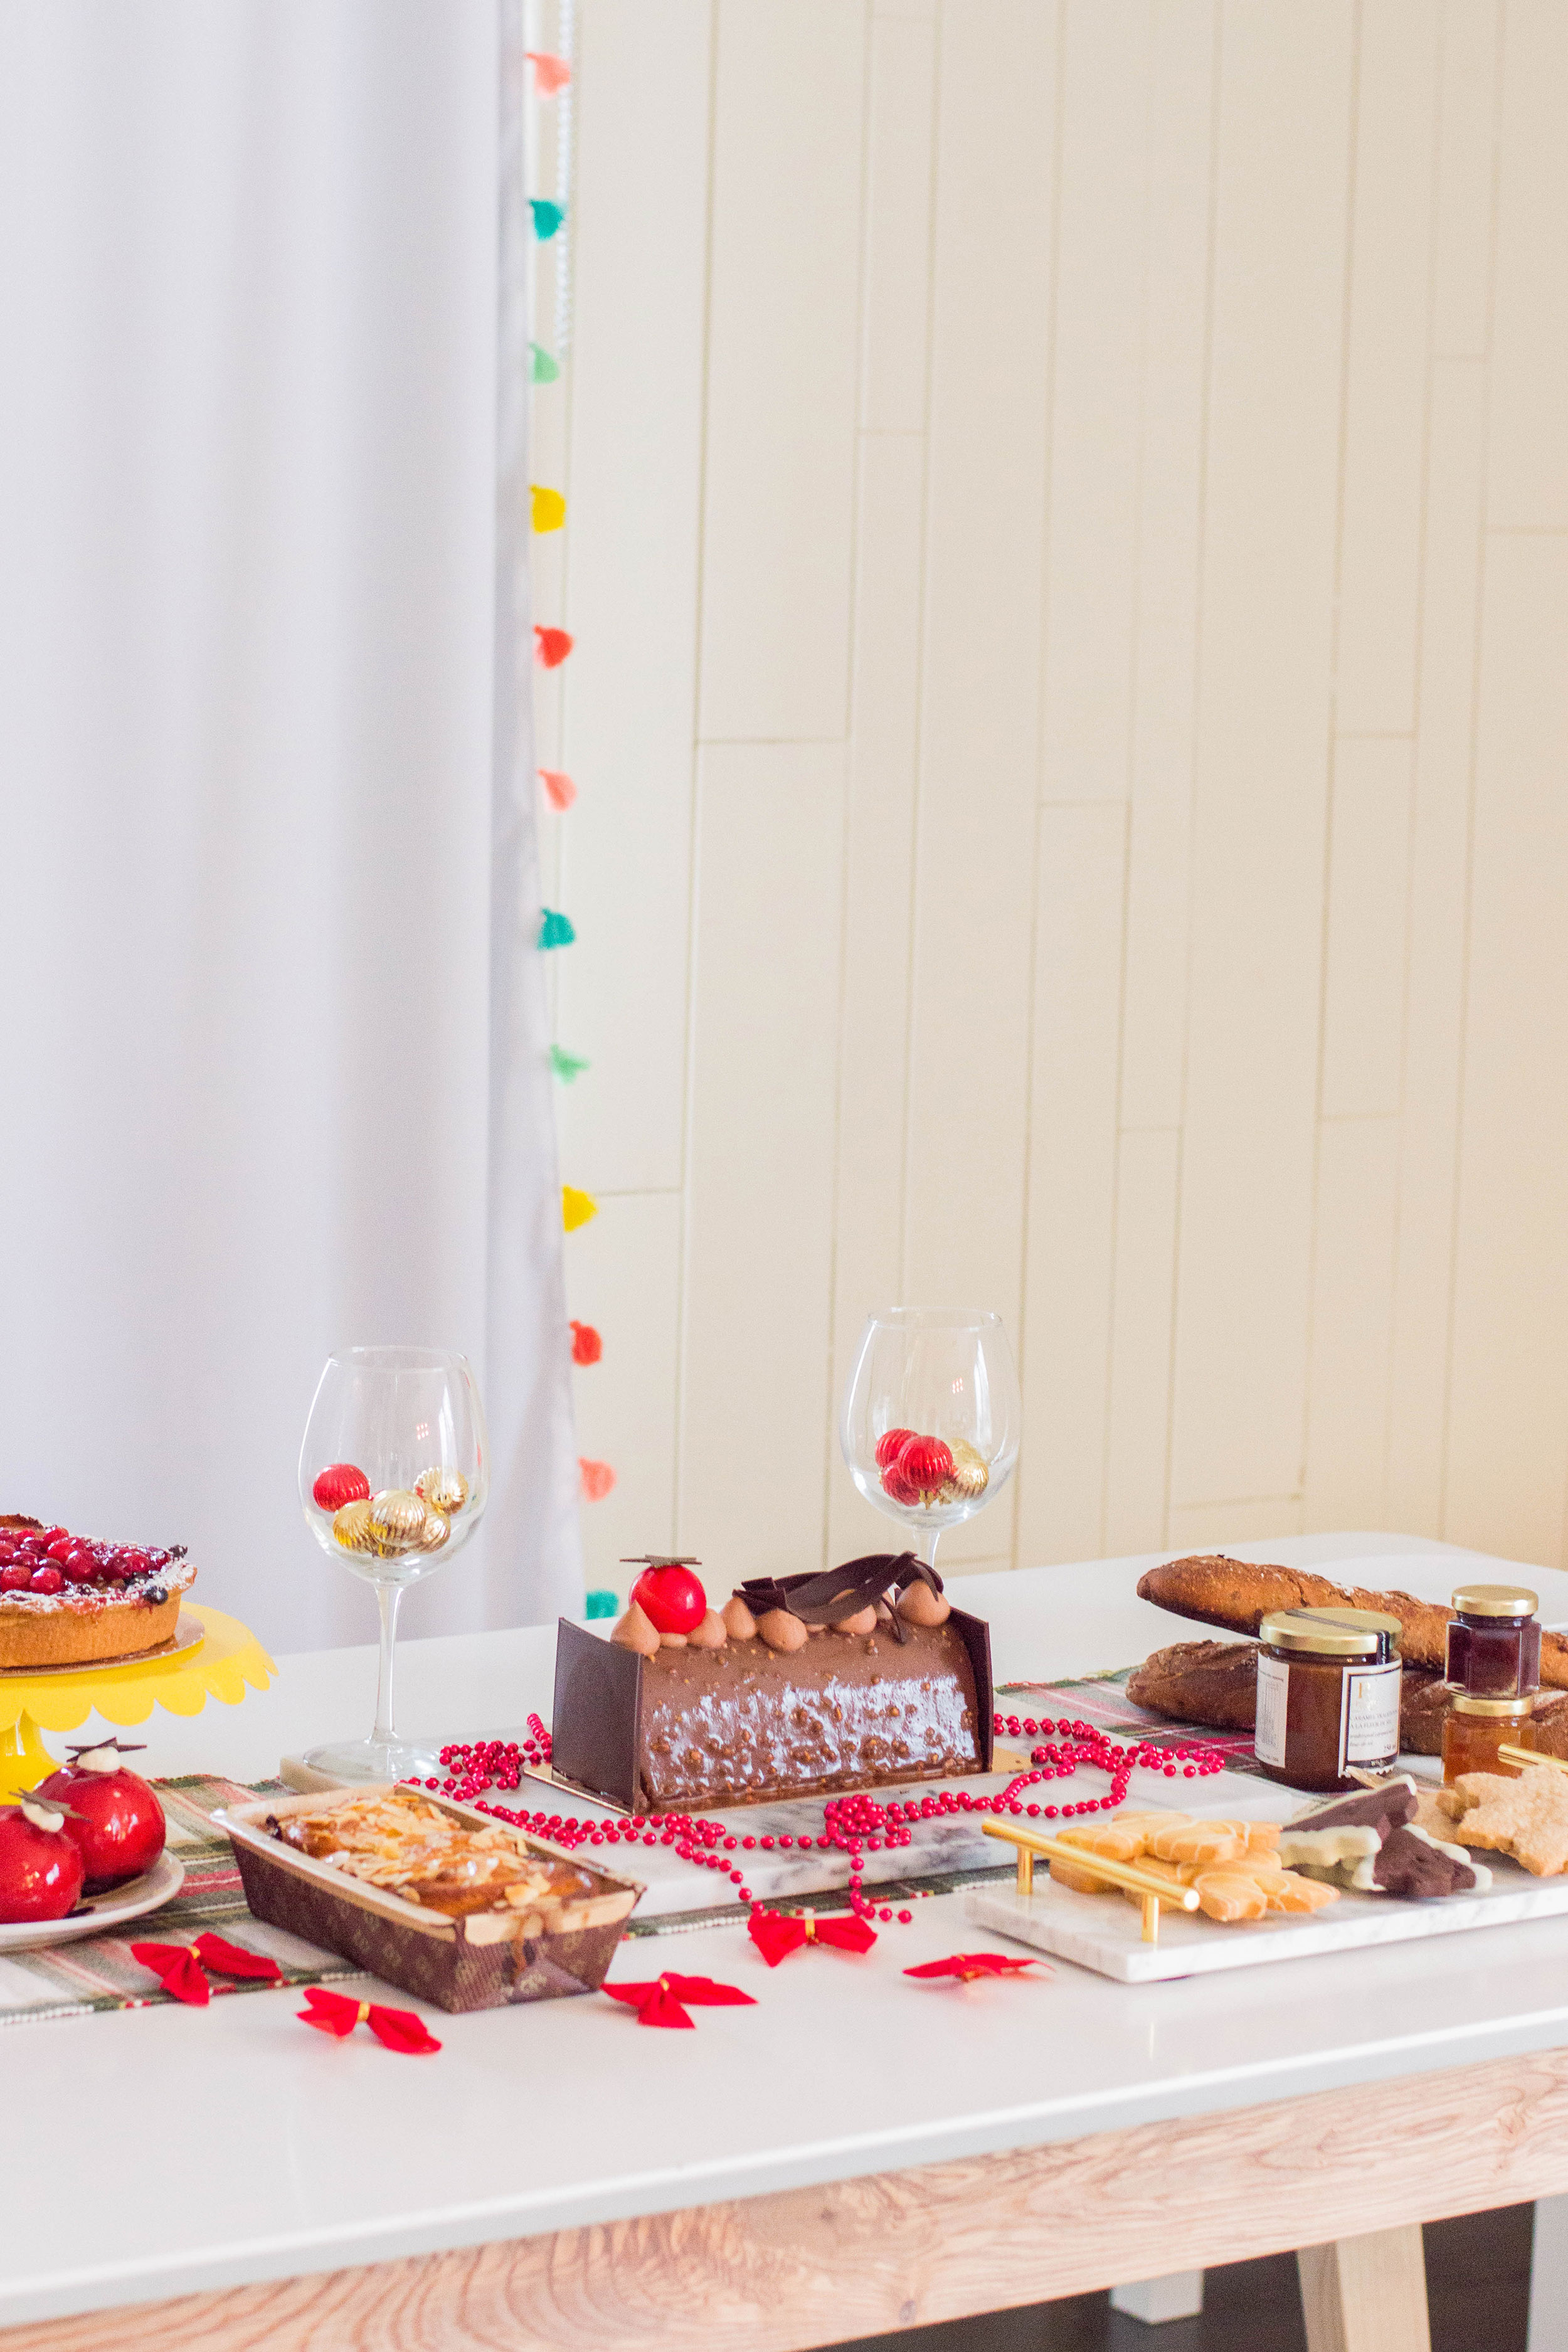 Ready to host for the holidays? Here's how to put together the sweetest Christmas dessert table. #christmasdesserts